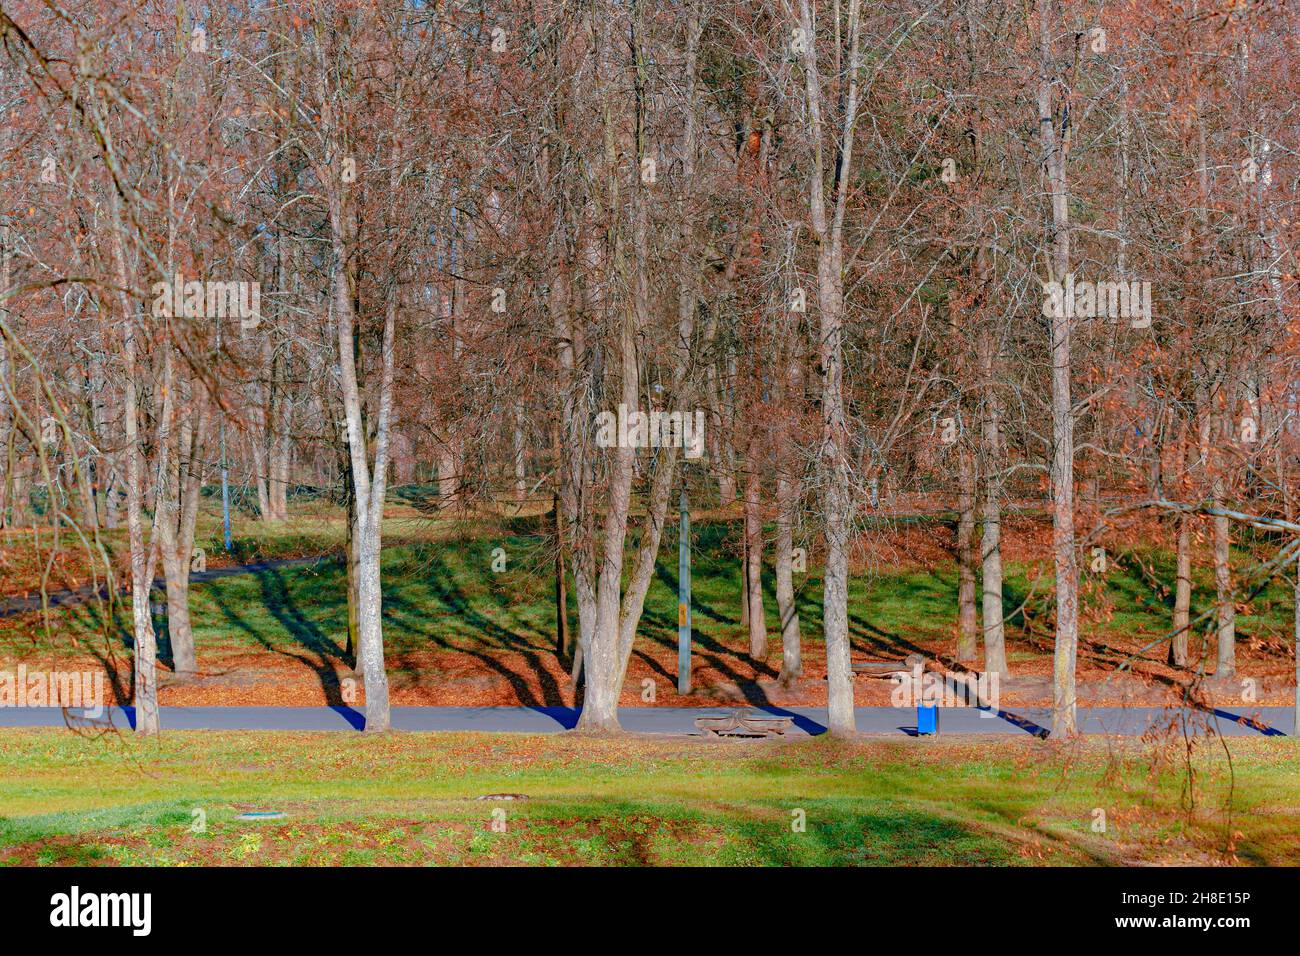 A beautiful autumn park with trees with fallen leaves, with paved footpaths on a sunny October day Stock Photo